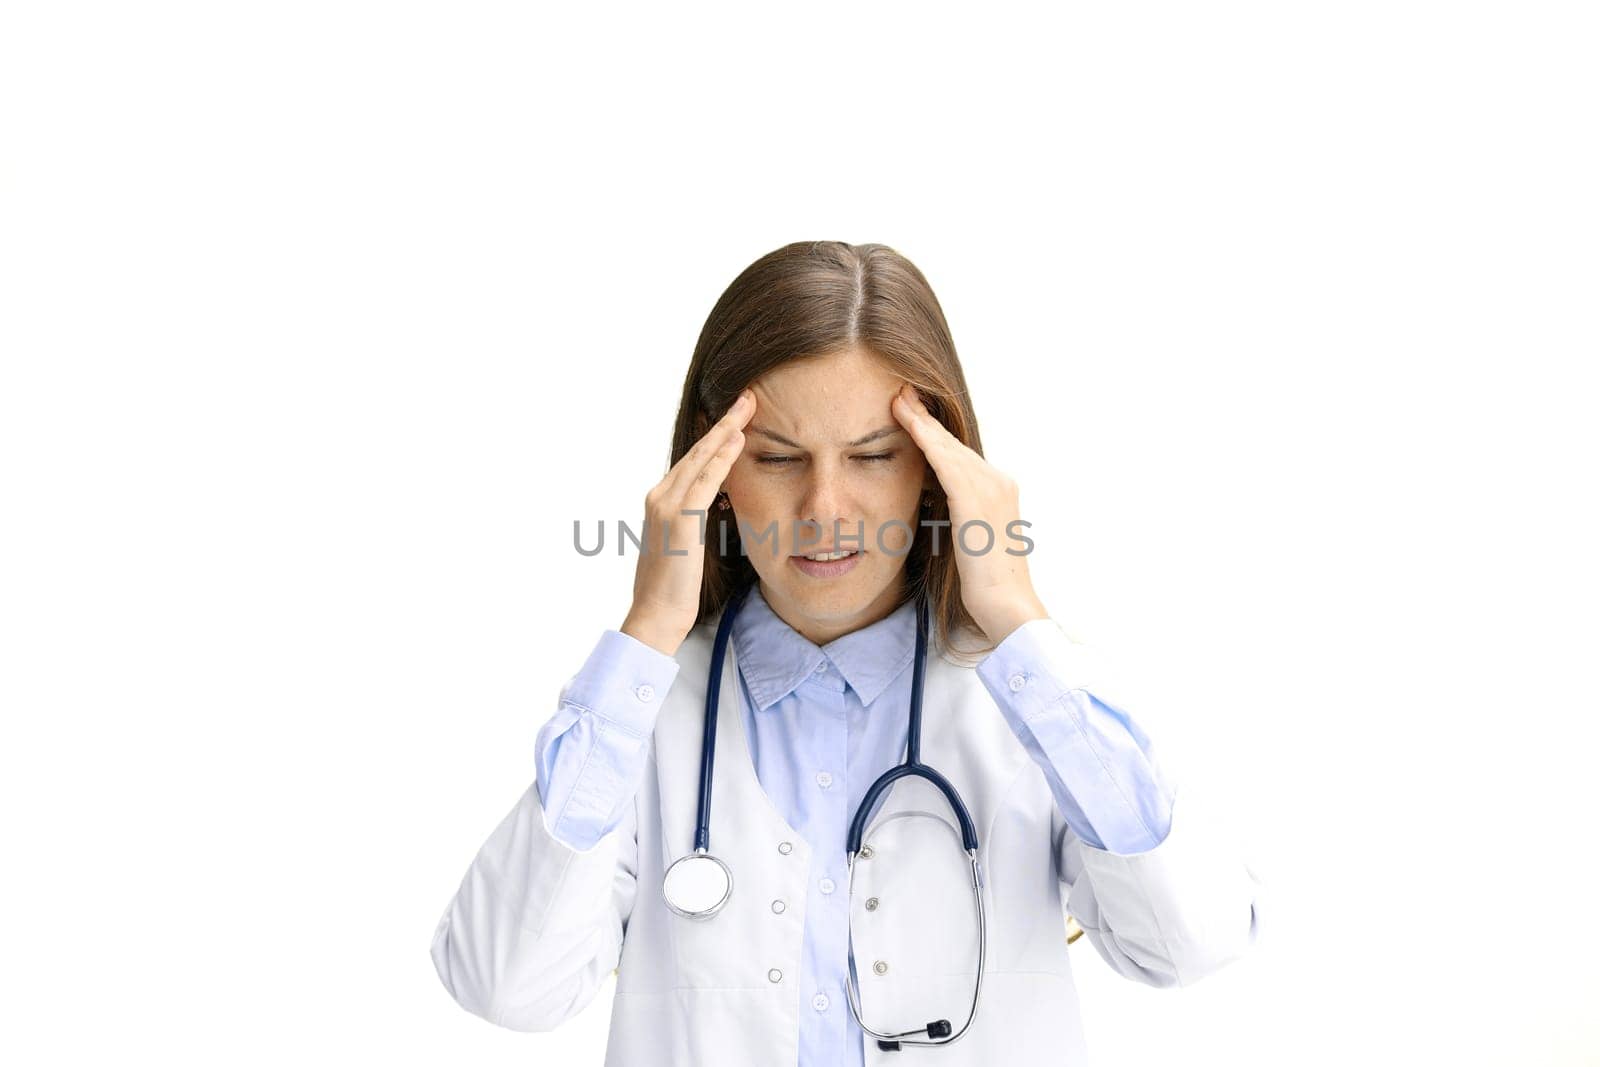 Female doctor, close-up, on a white background, tired by Prosto